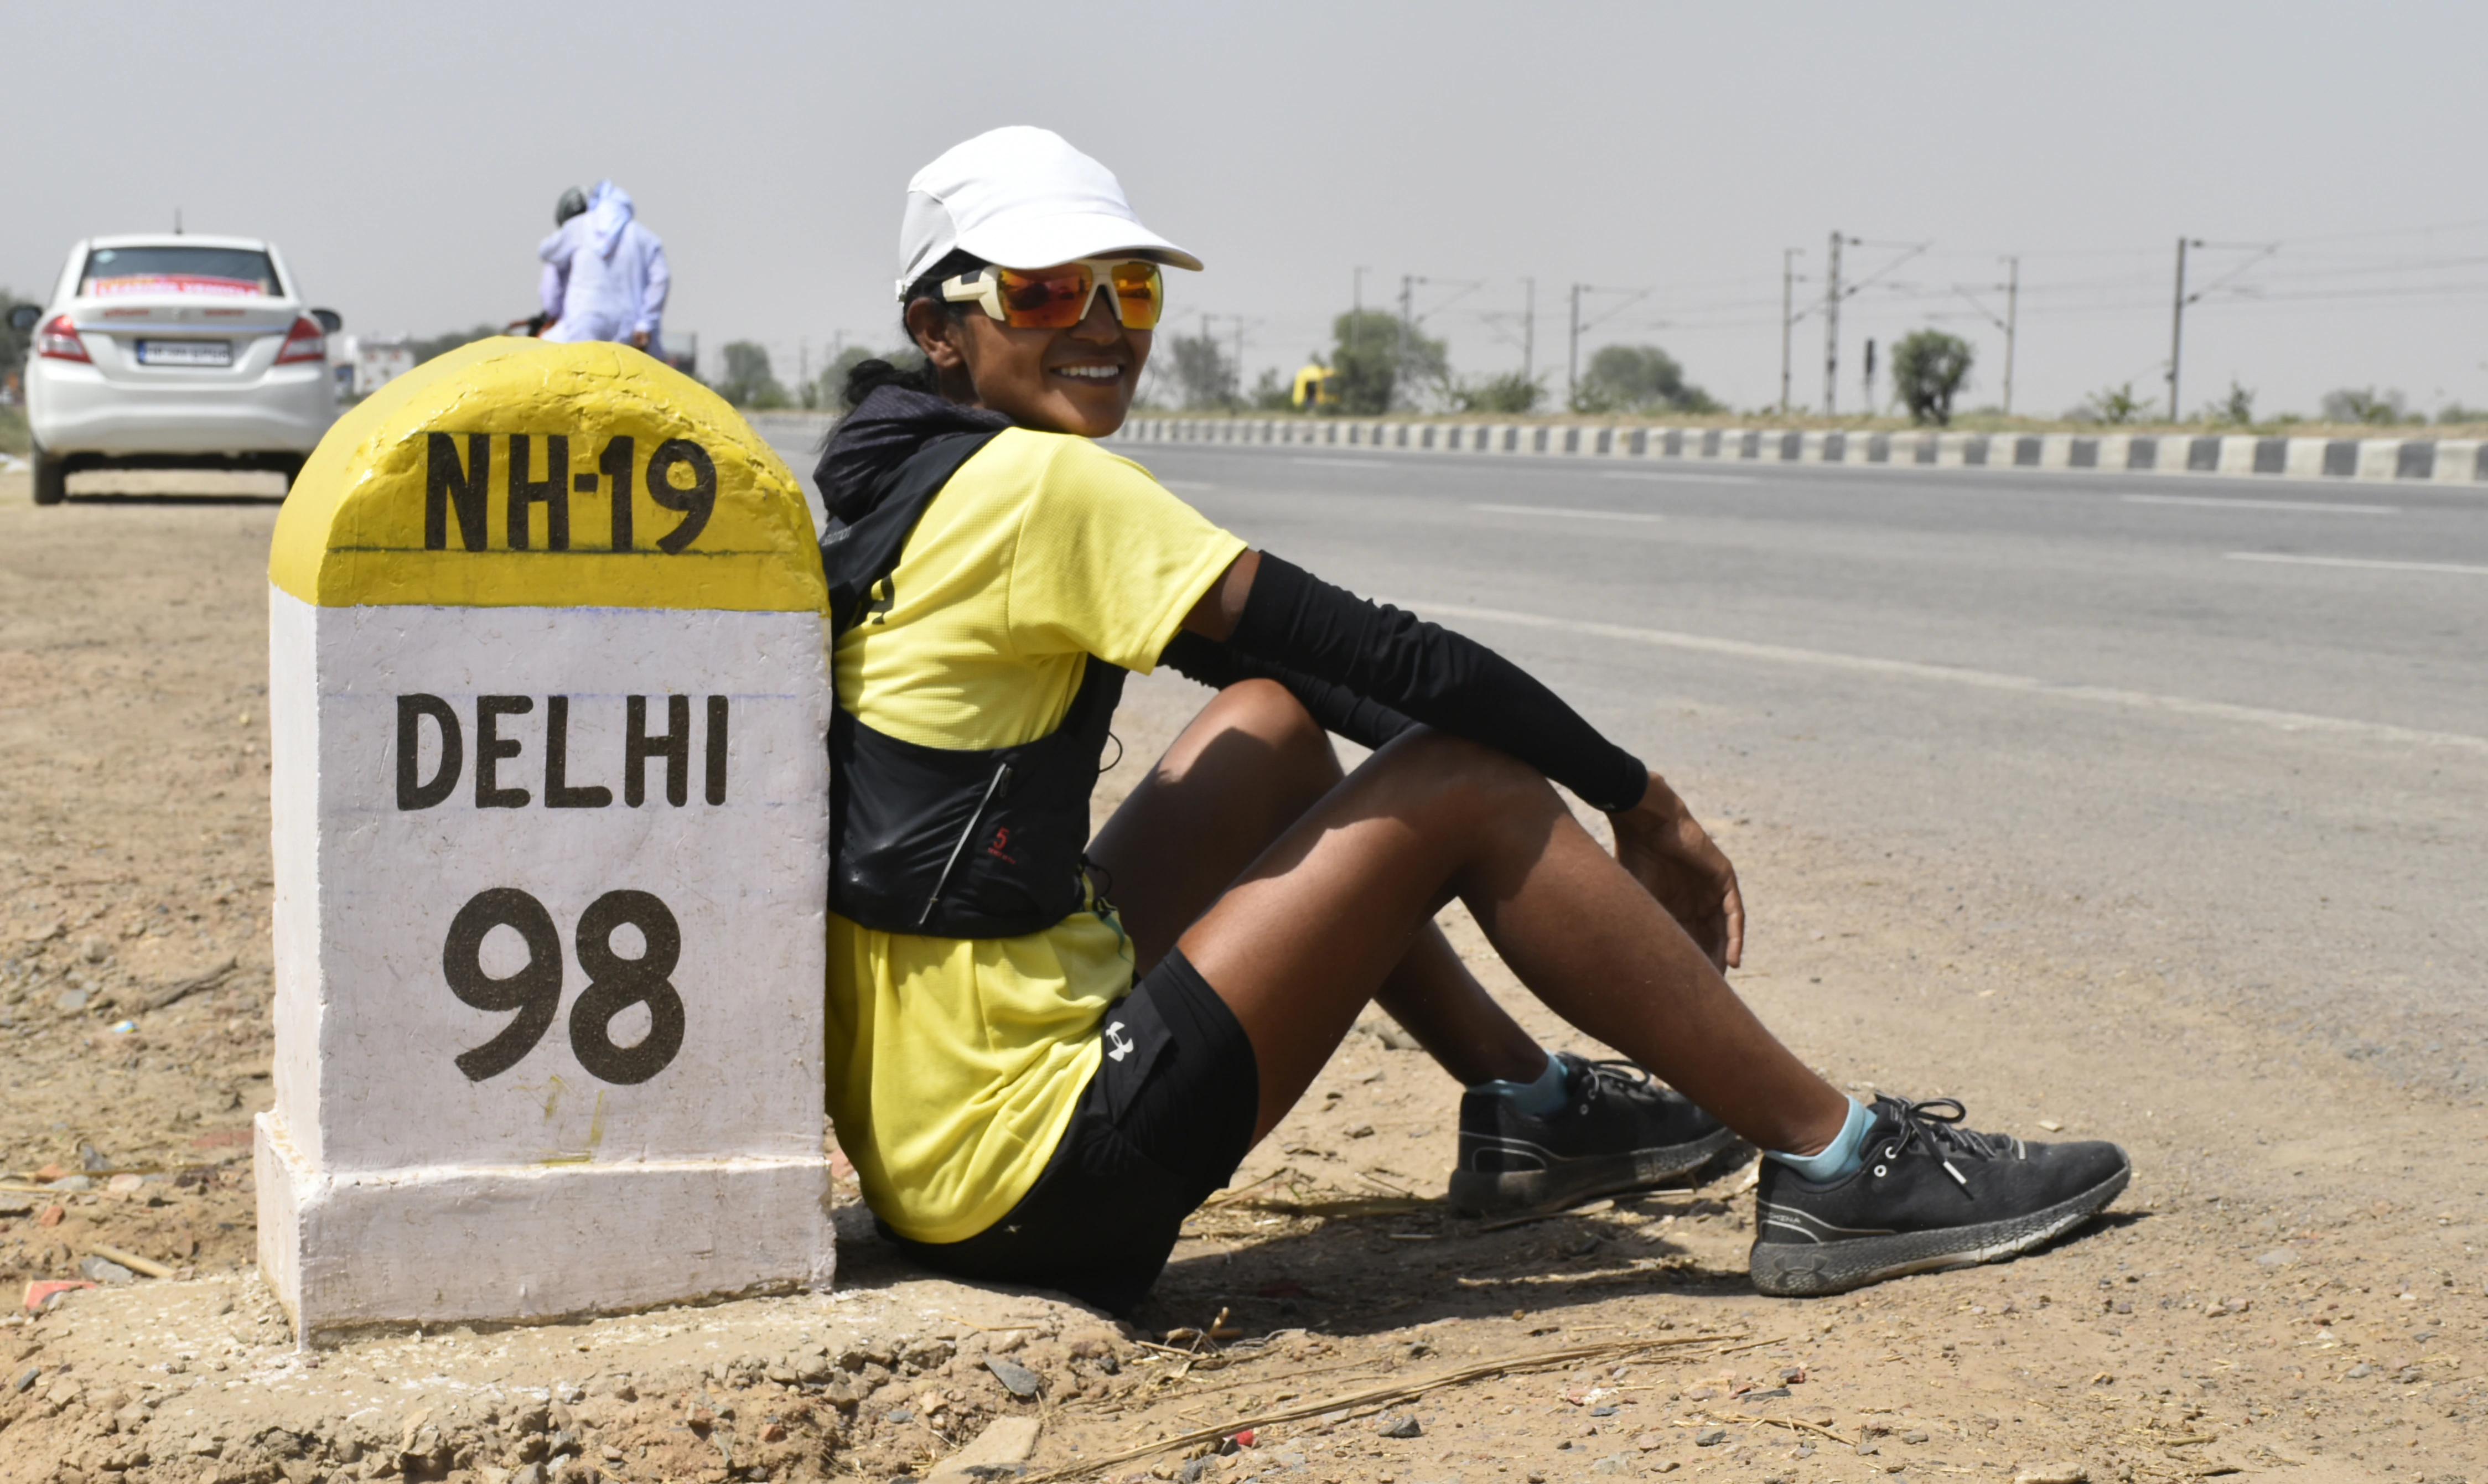 Sufiya khan makes the Guinness record for running 6000 km in 110 days